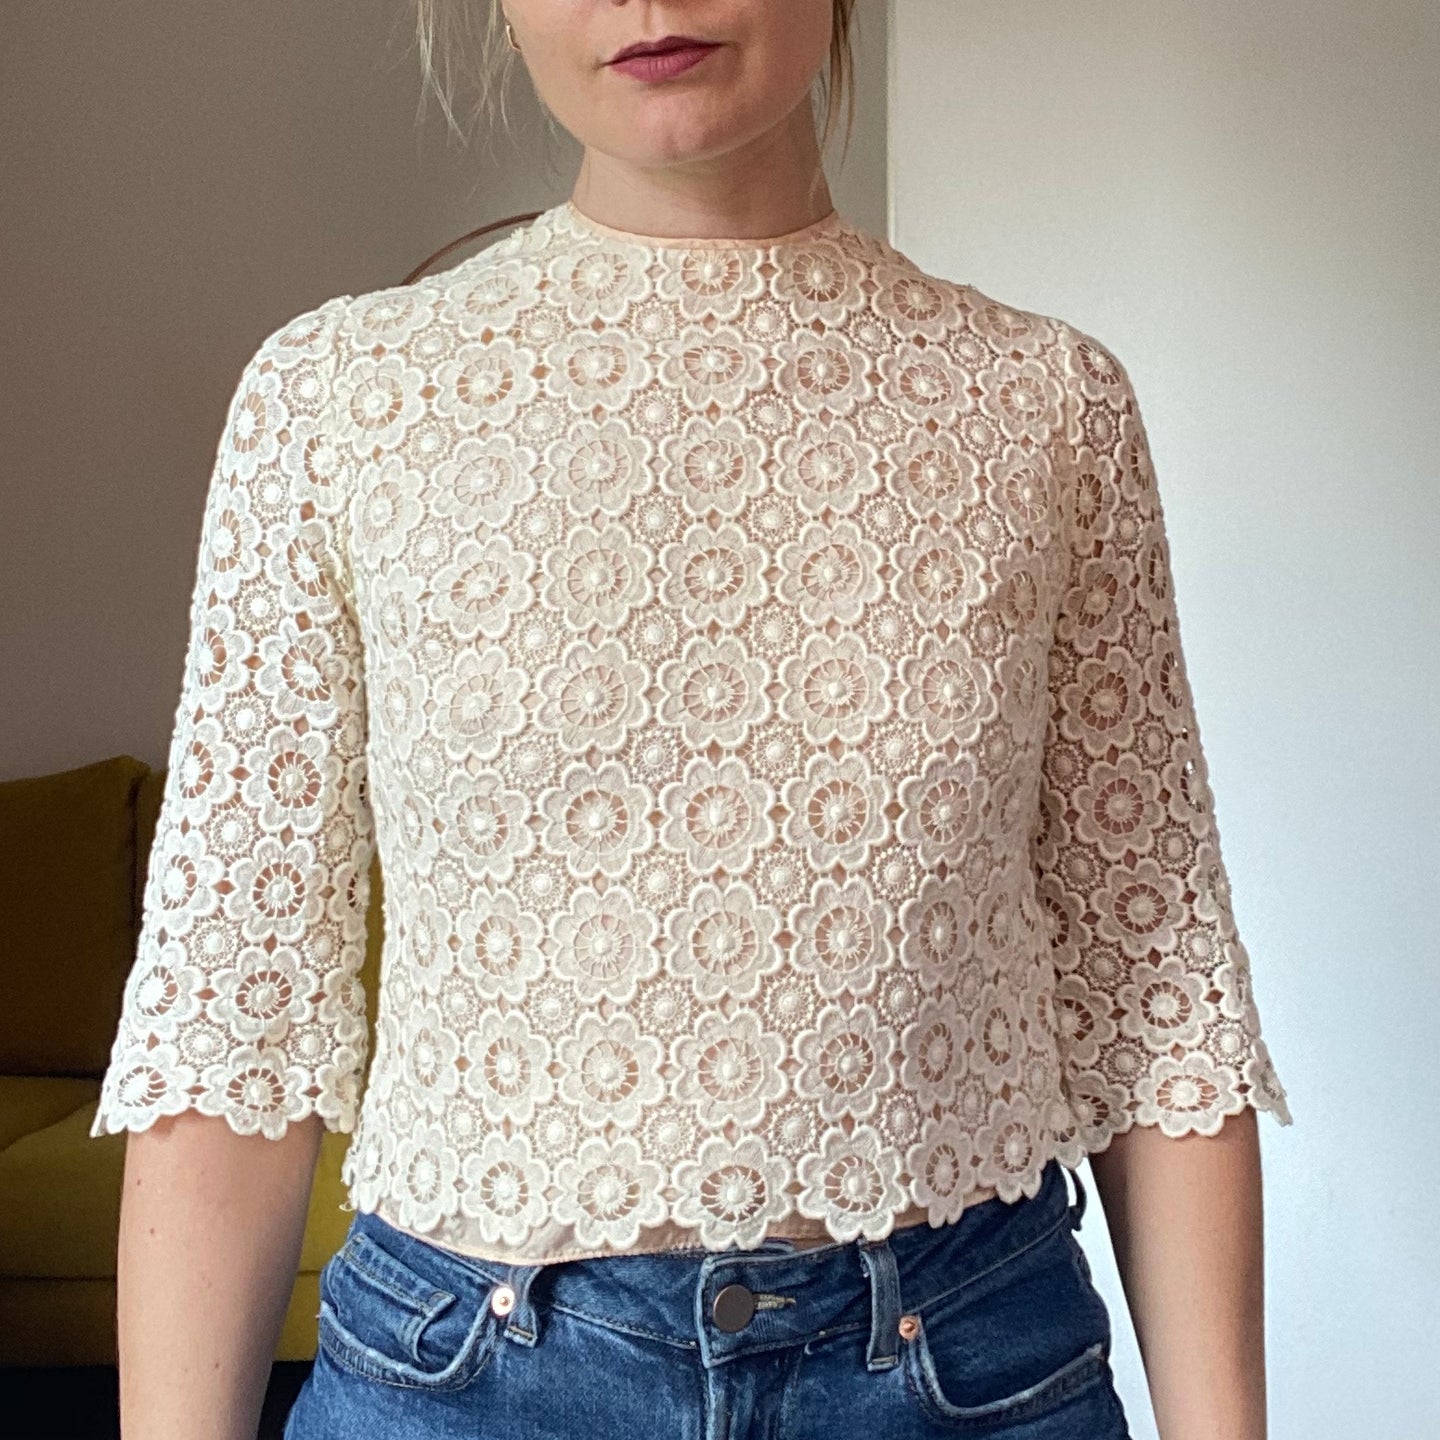 Posie lace top